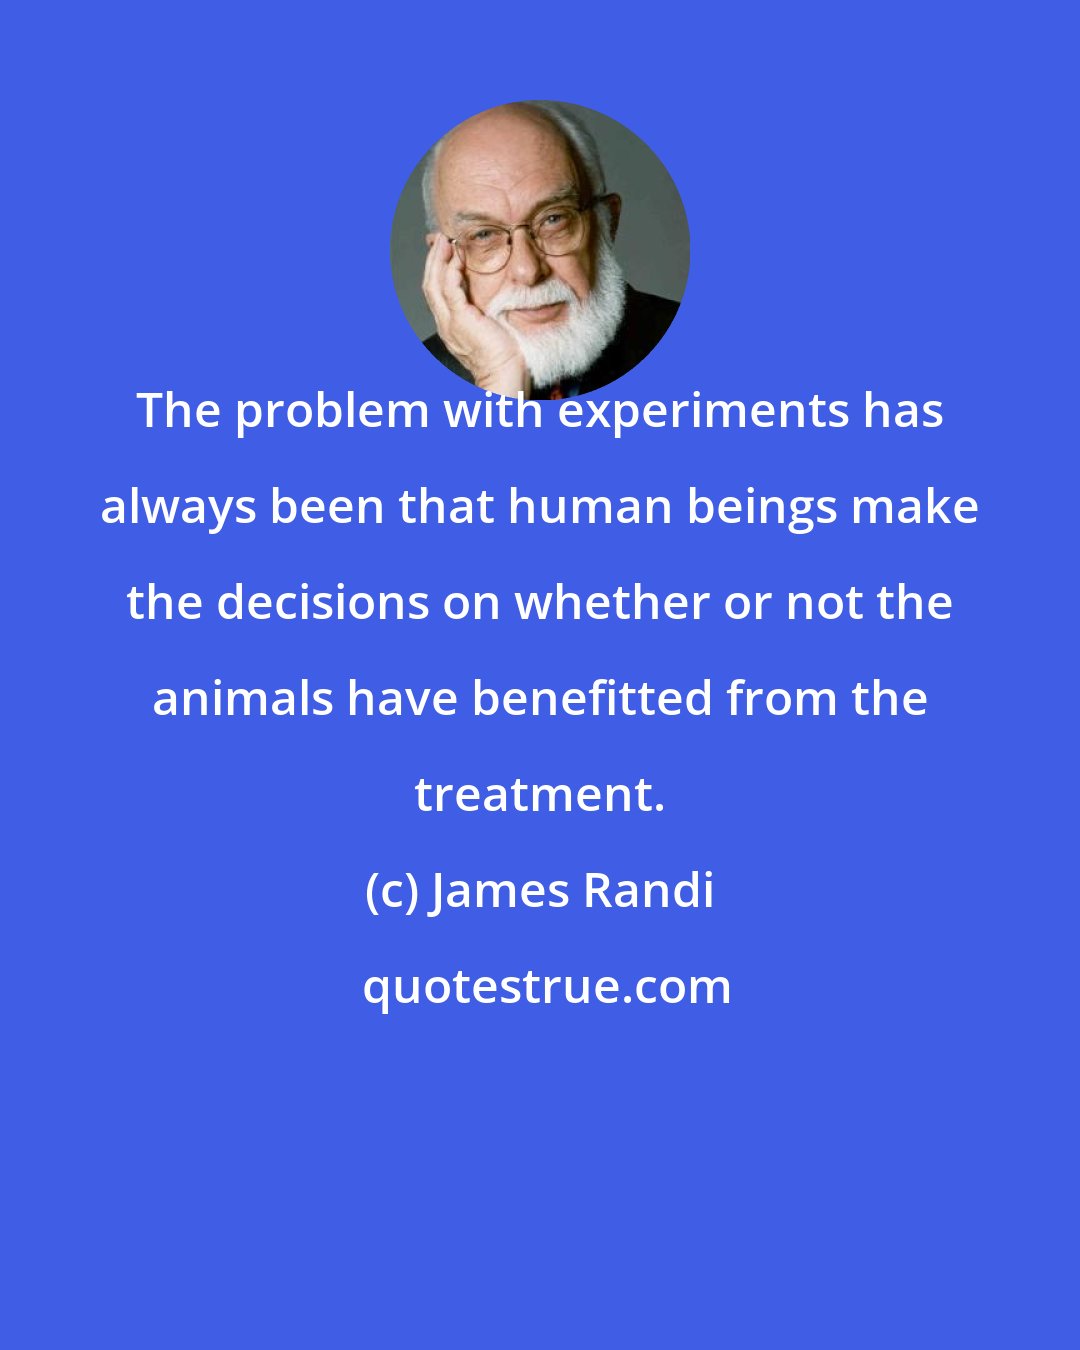 James Randi: The problem with experiments has always been that human beings make the decisions on whether or not the animals have benefitted from the treatment.